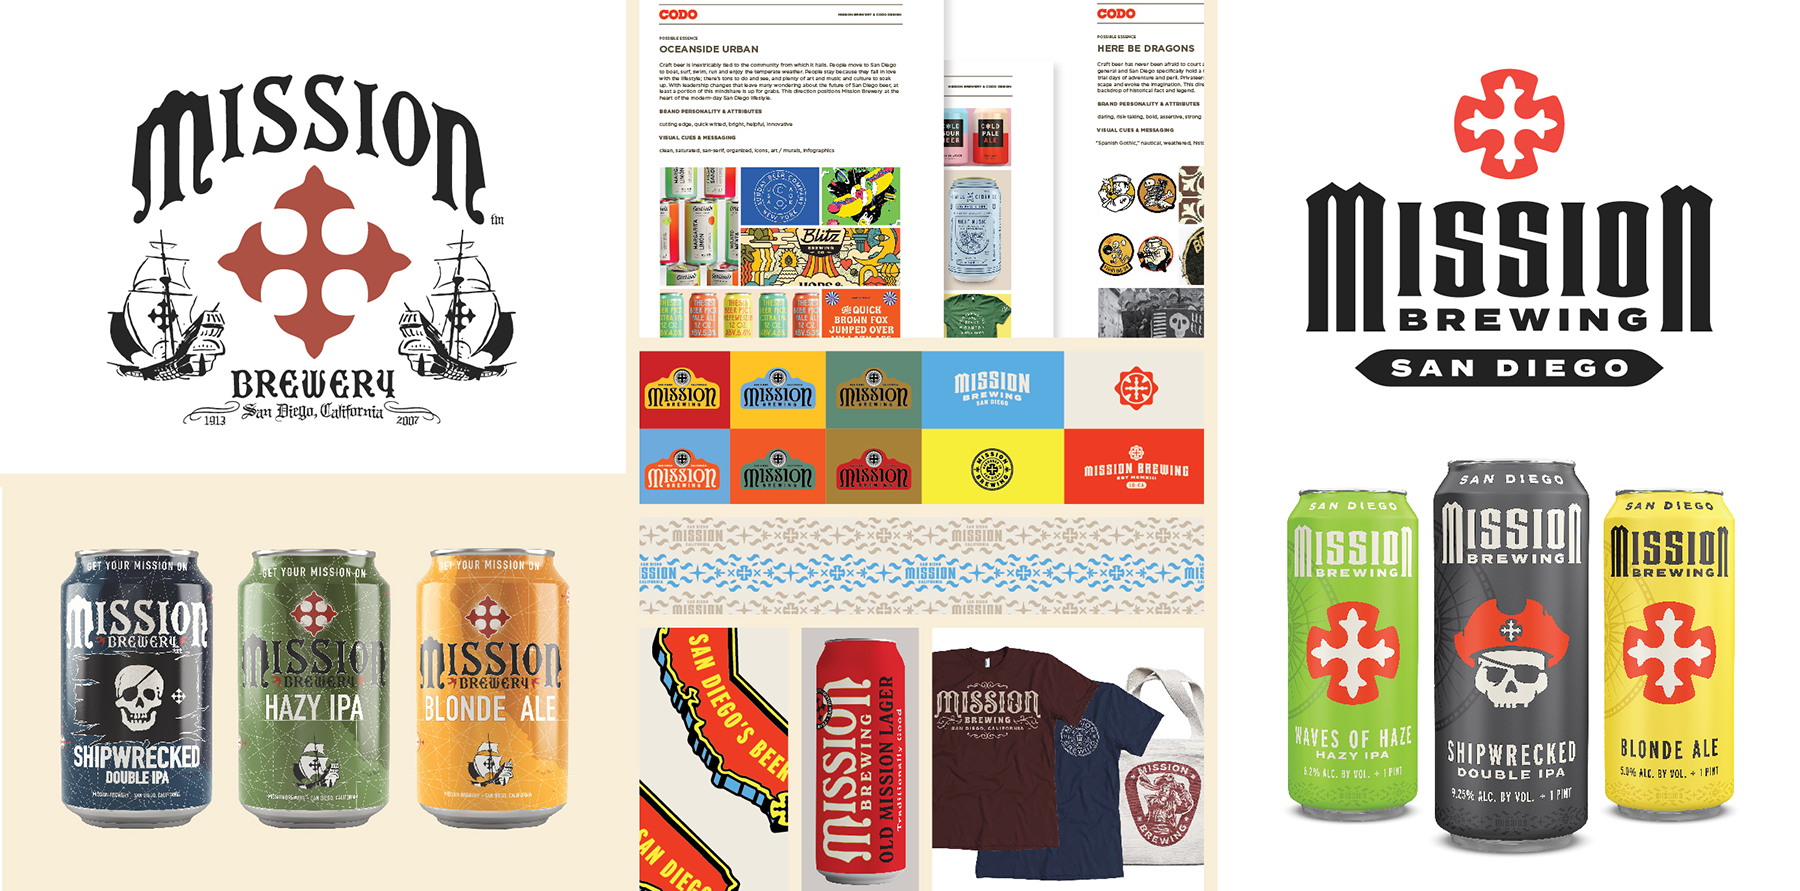 Rebranding Mission Brewing by Codo Design